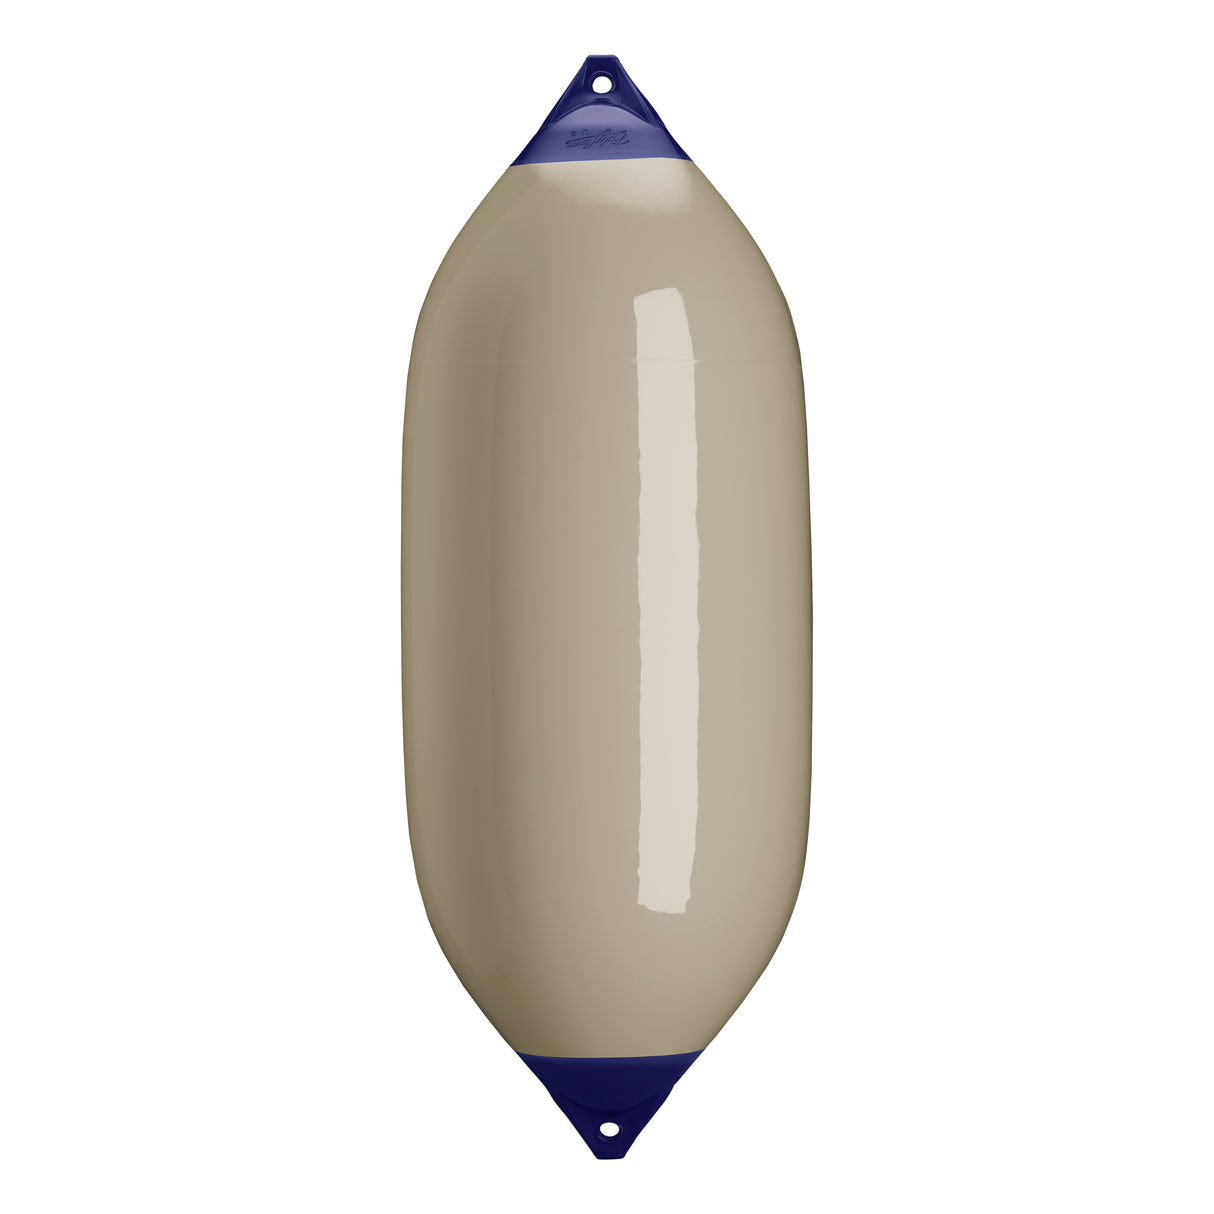 Sand boat fender with Navy-Top, Polyform F-13 